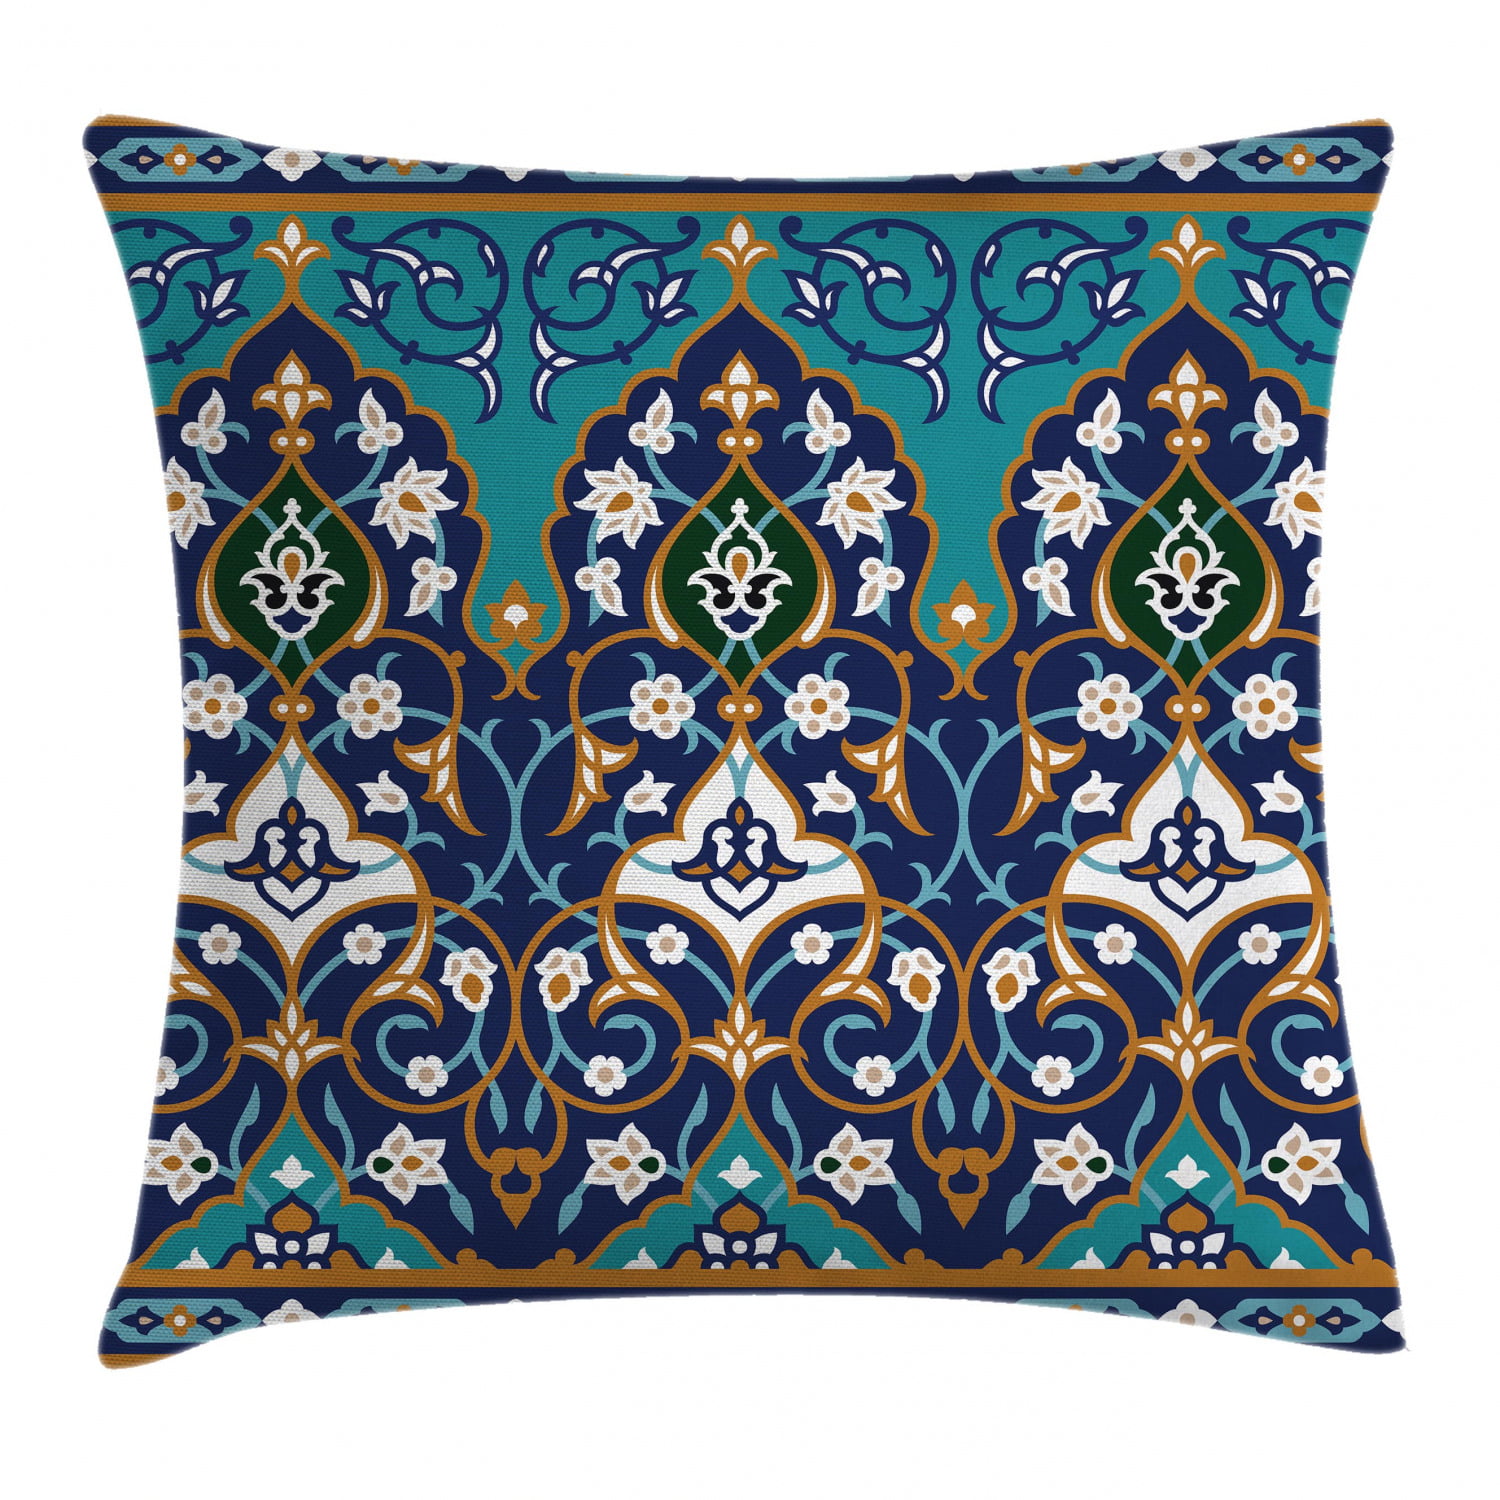 Ornamental Floral Pattern and Border Traditional Middle Eastern Artwork 18 X 18 Petrol Blue Ambesonne Orient Throw Pillow Cushion Cover Decorative Square Accent Pillow Case 